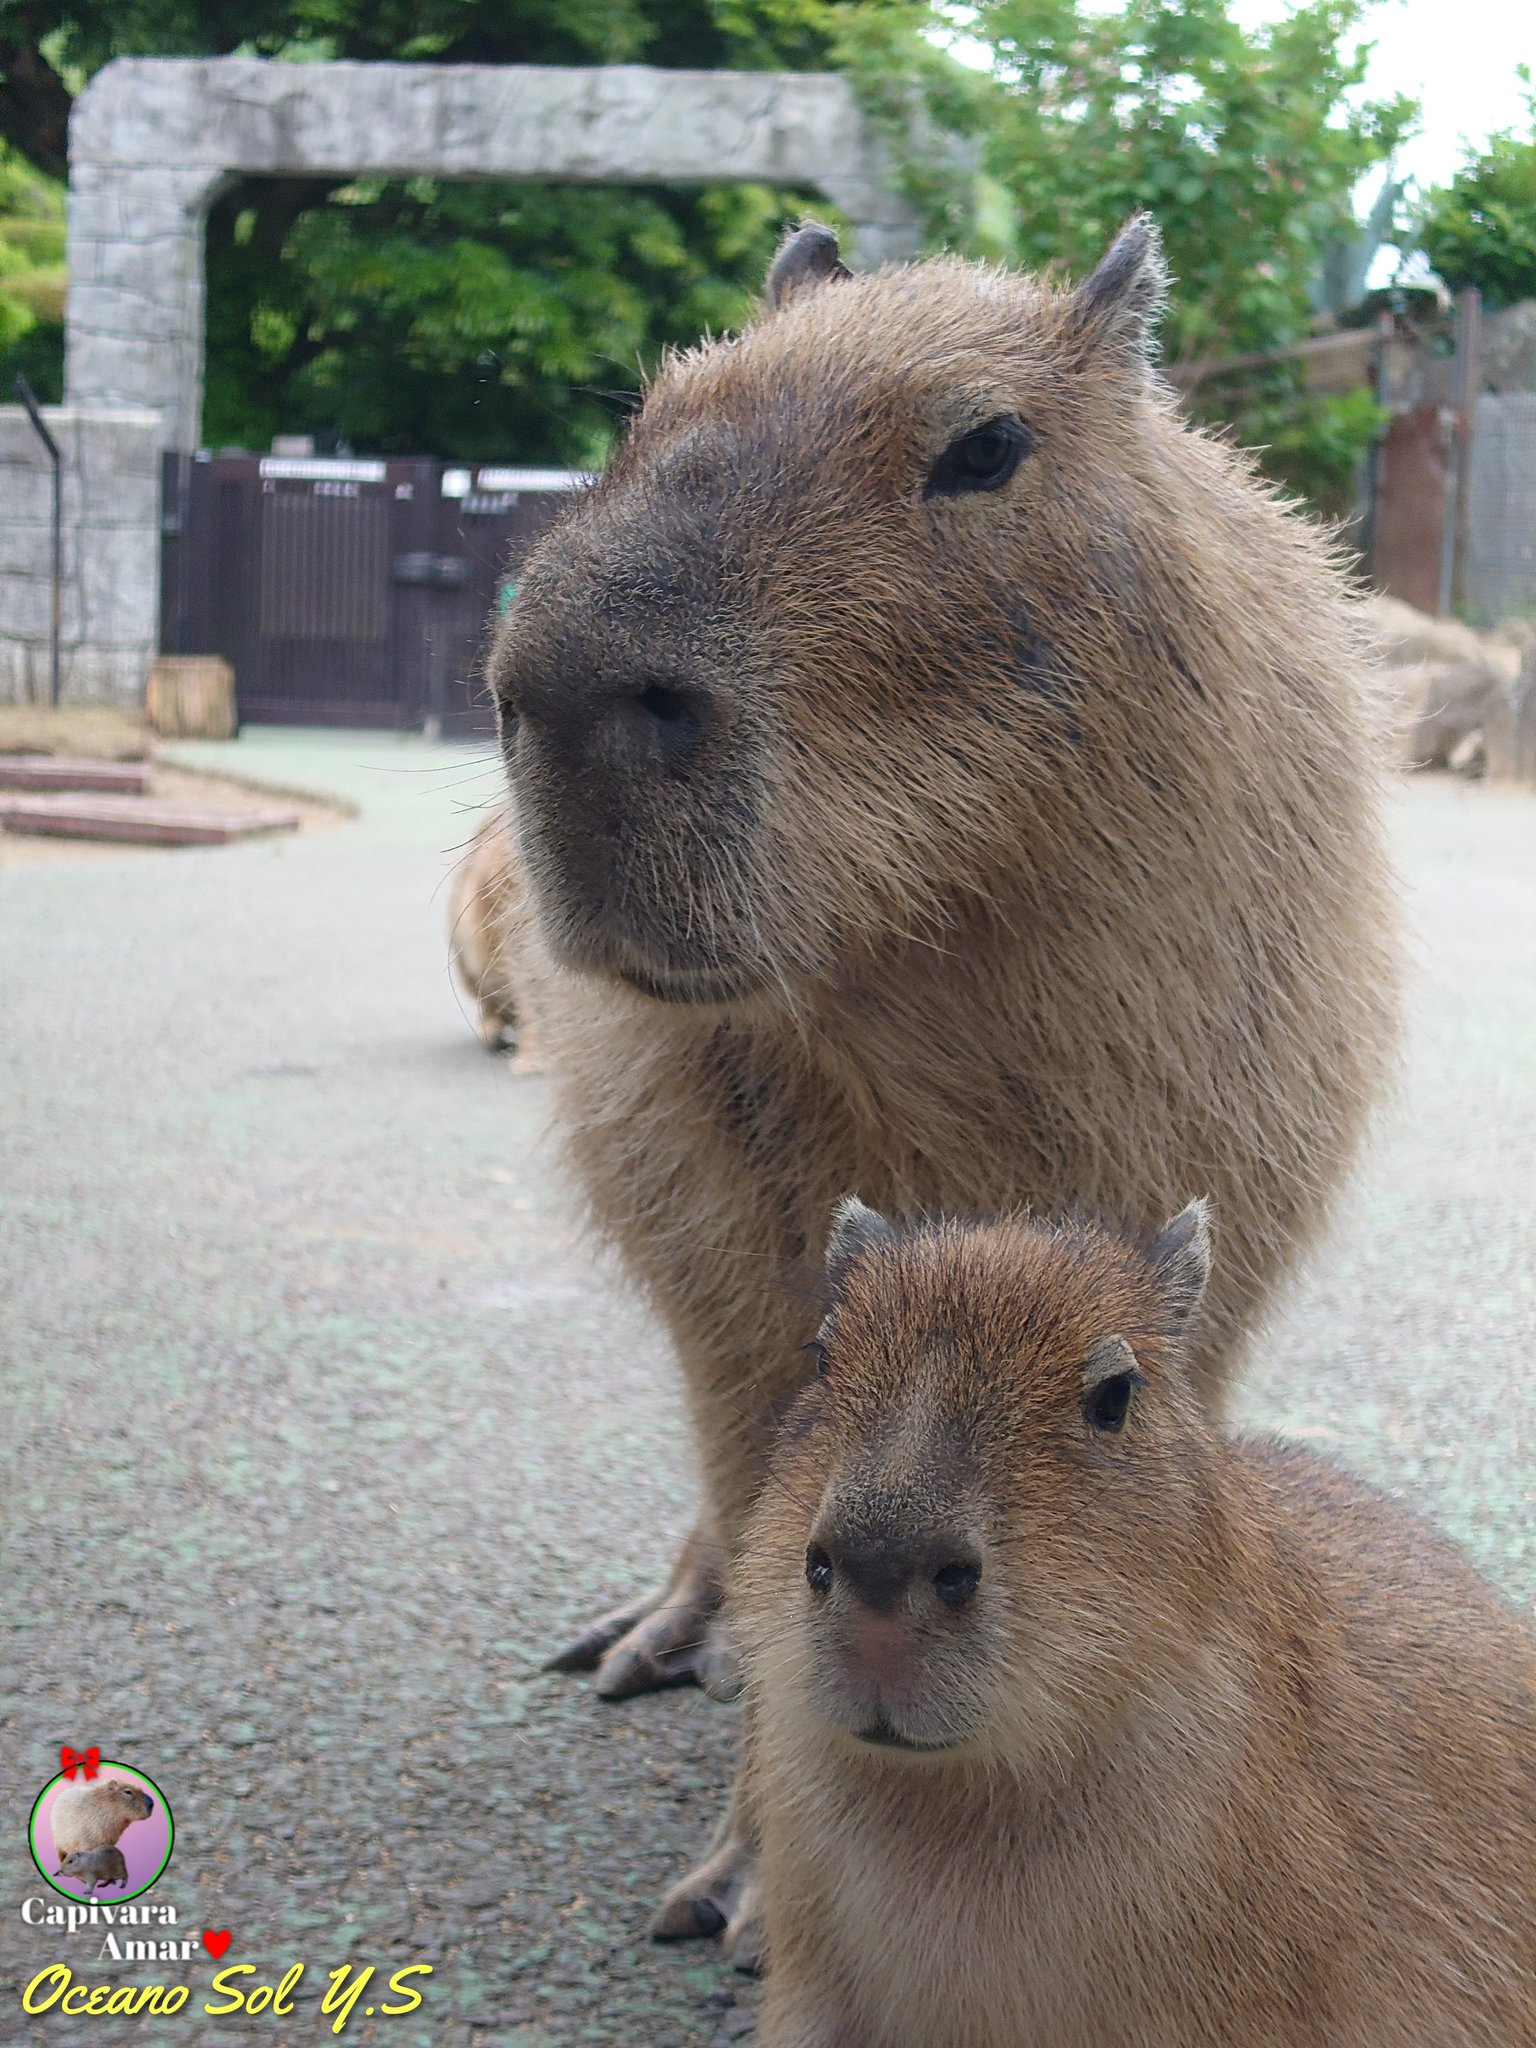 Me and my little dog - Wild animals, Zoo, Capybara, Rodents, Young